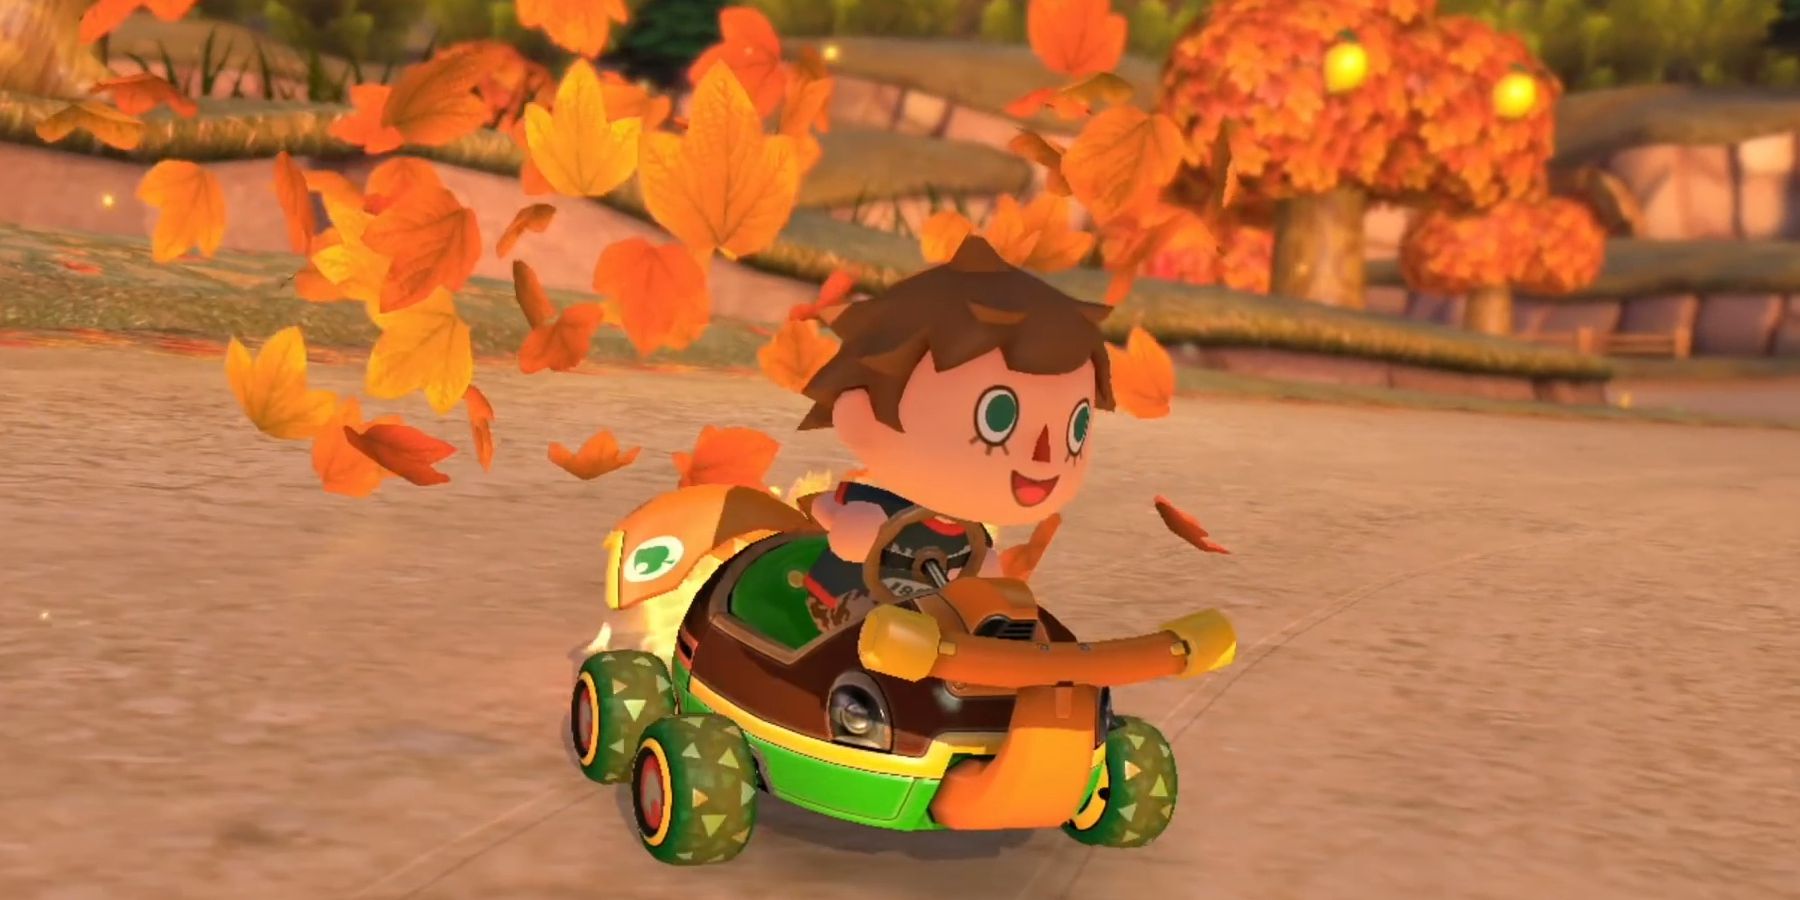 Villager driving through a pile of leaves, which fly behind him. Image source: Nintendo of America on YouTube